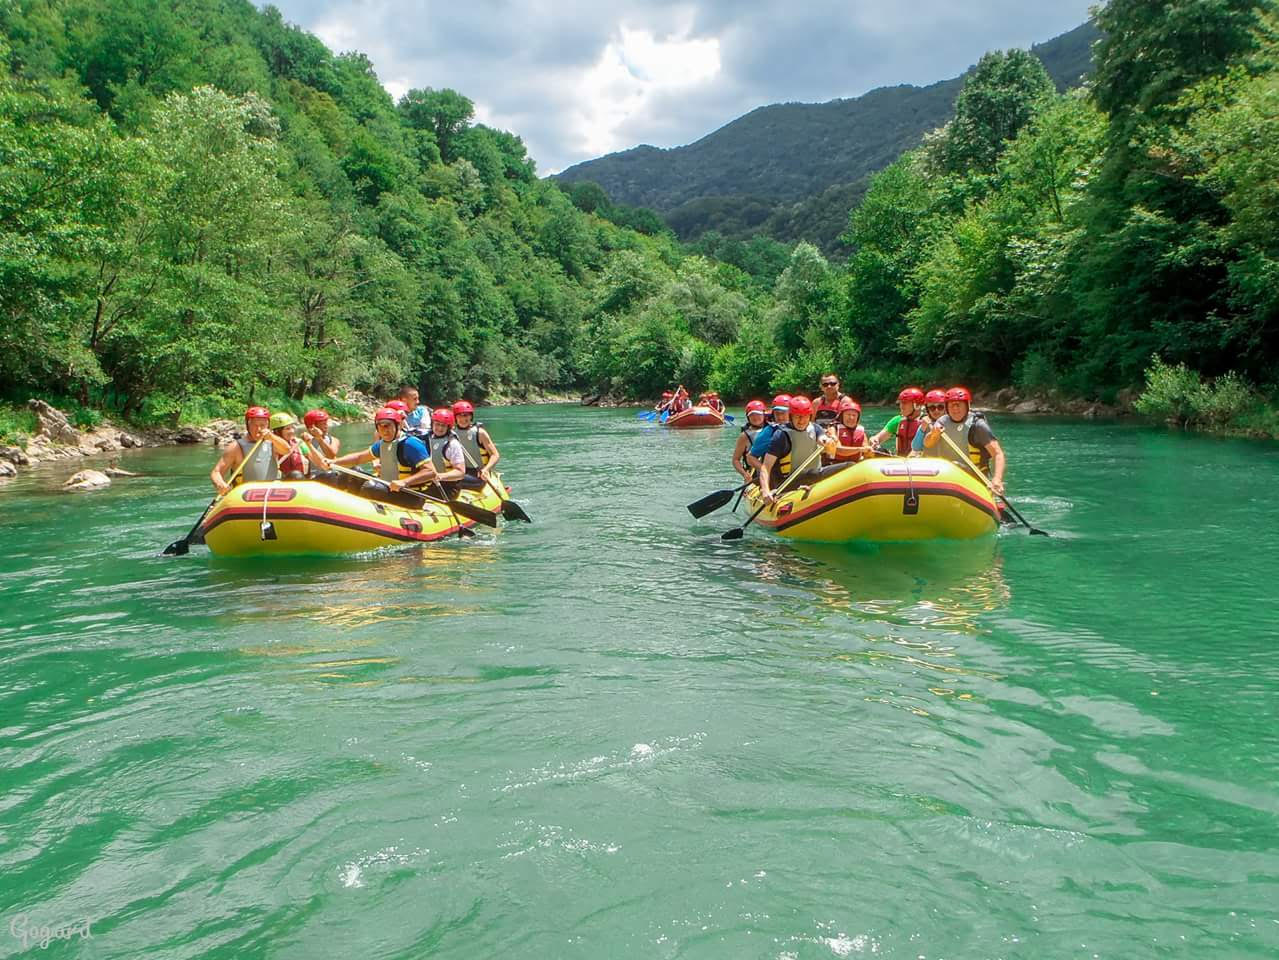 Rafting on class II whitewater rapids on the Una river